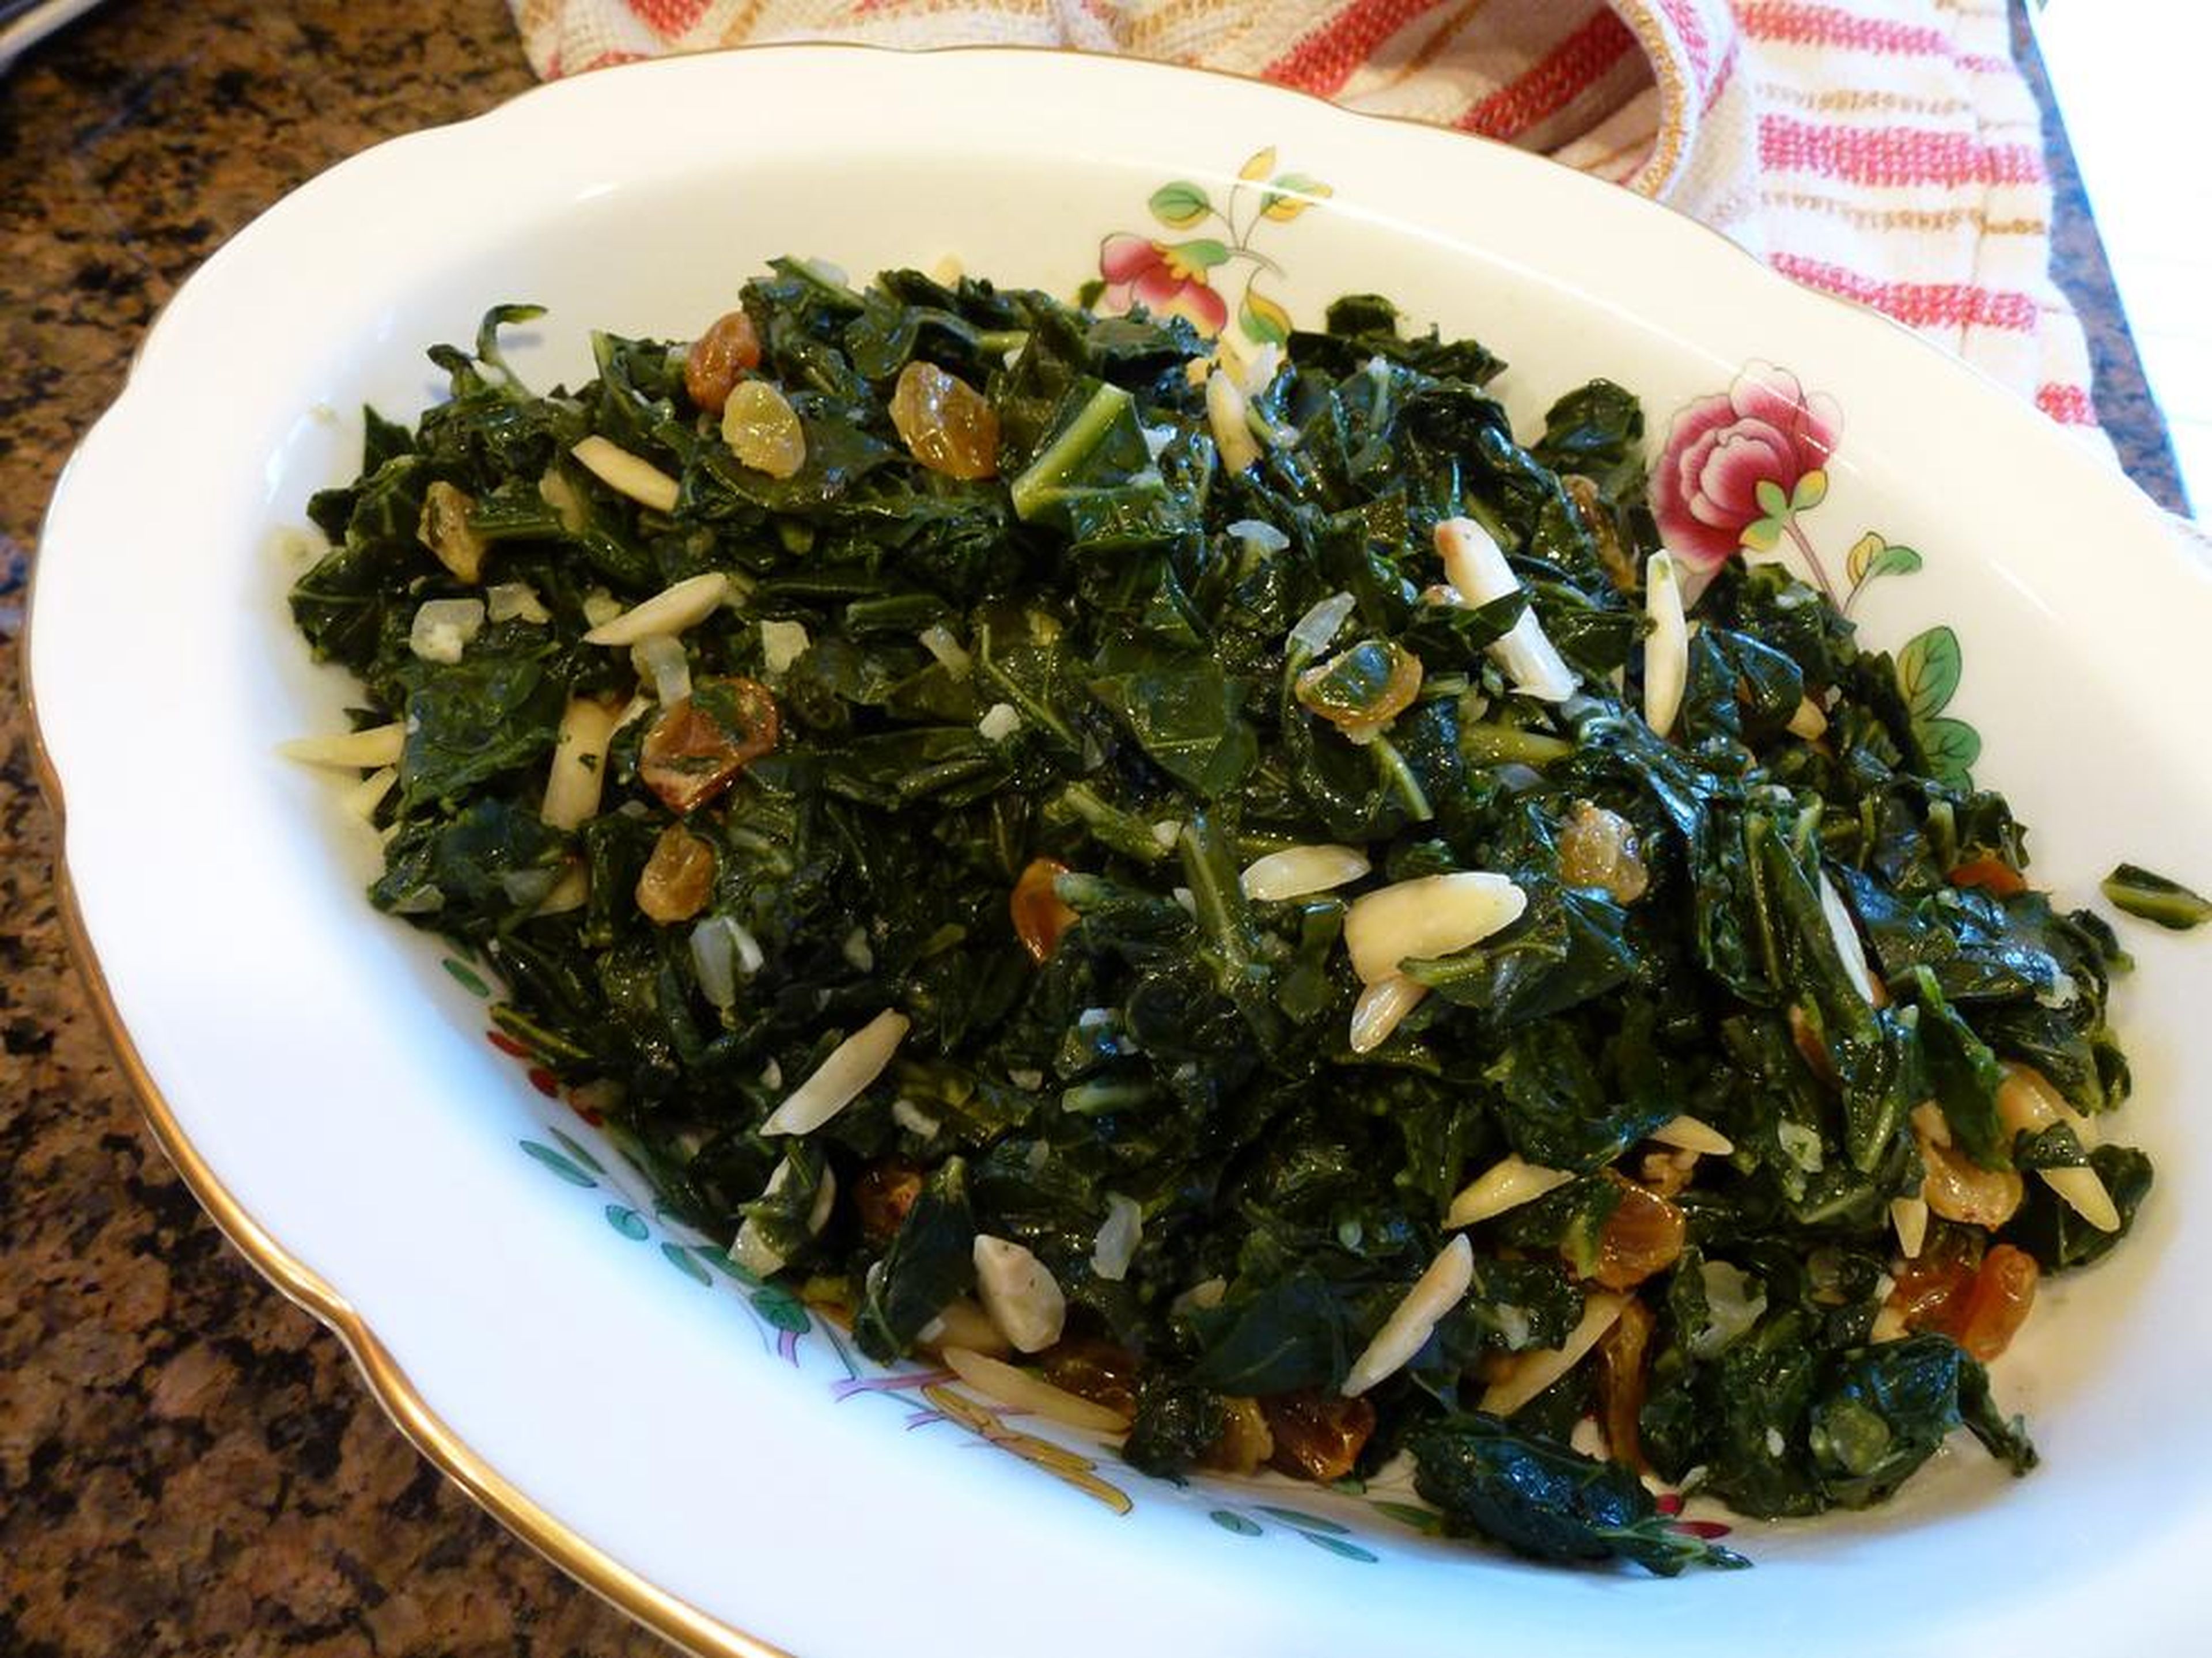 Collard greens have your vitamins covered from A to Z, literally.